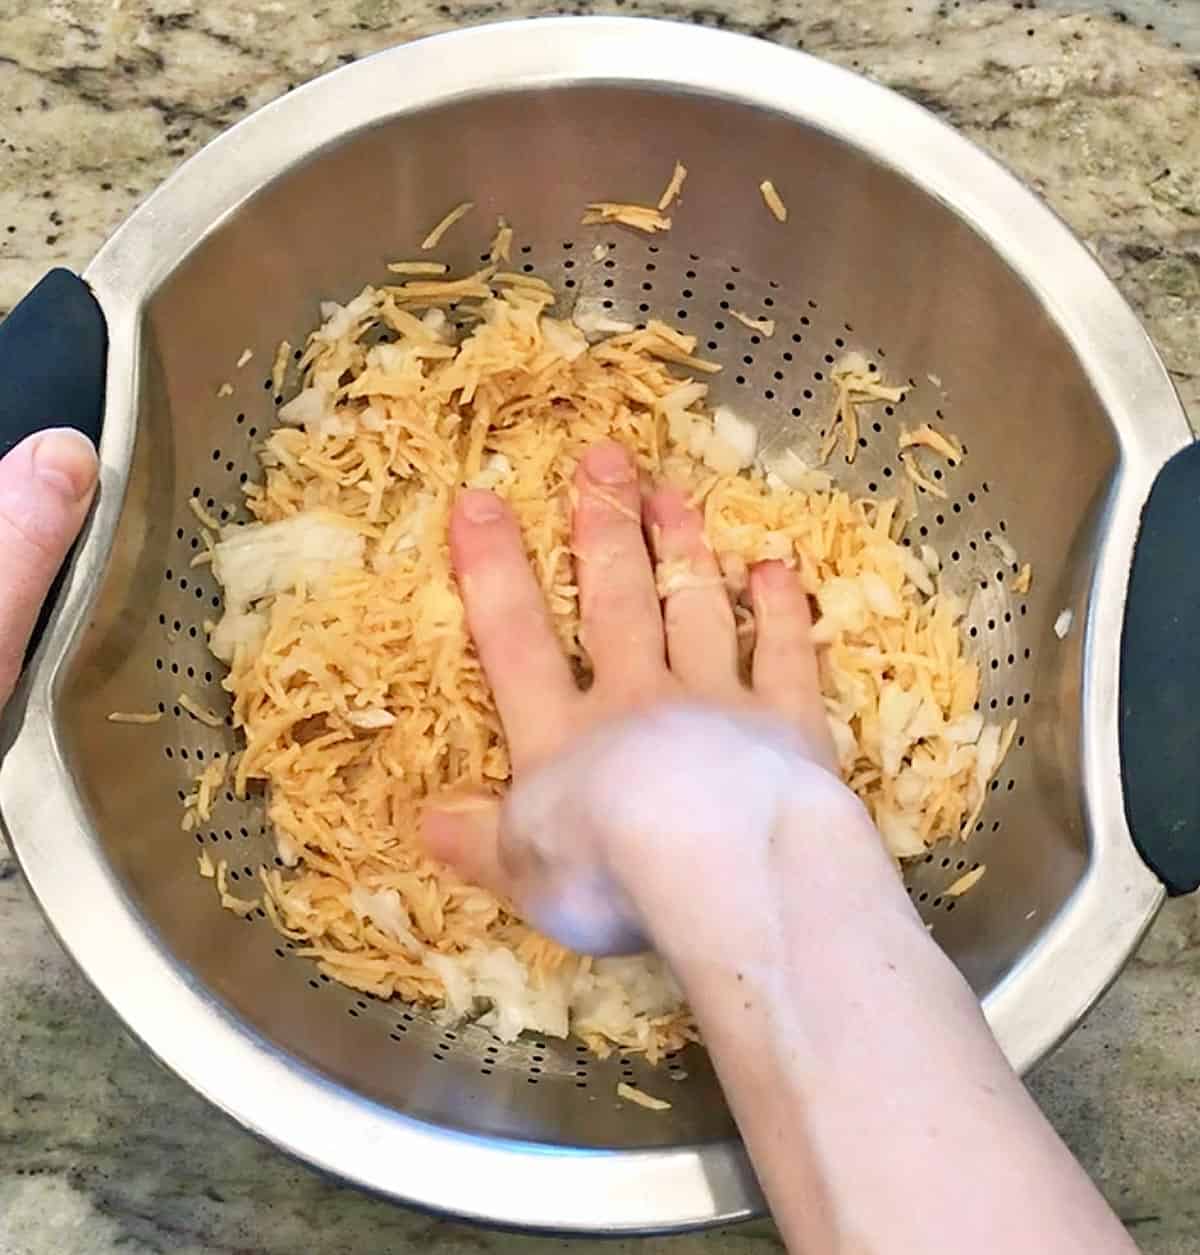 Removing liquid from the potatoes and onions.